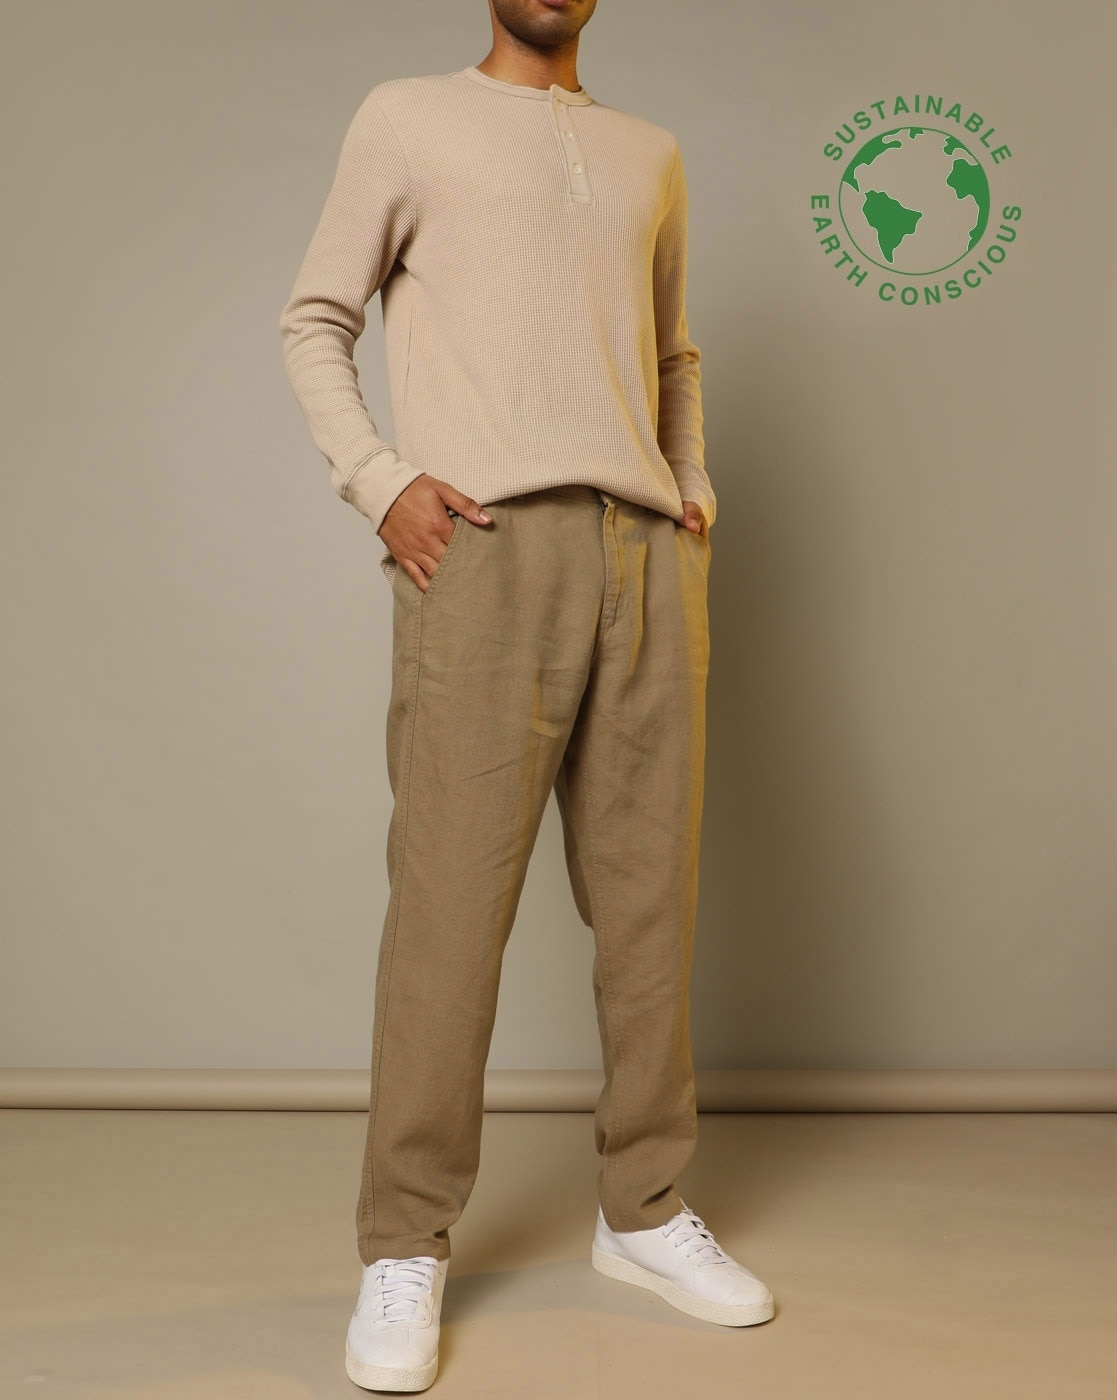 White Mens 100 Linen Beach Tapered Pants Trousers Relaxed Fit - Cholp-saigonsouth.com.vn